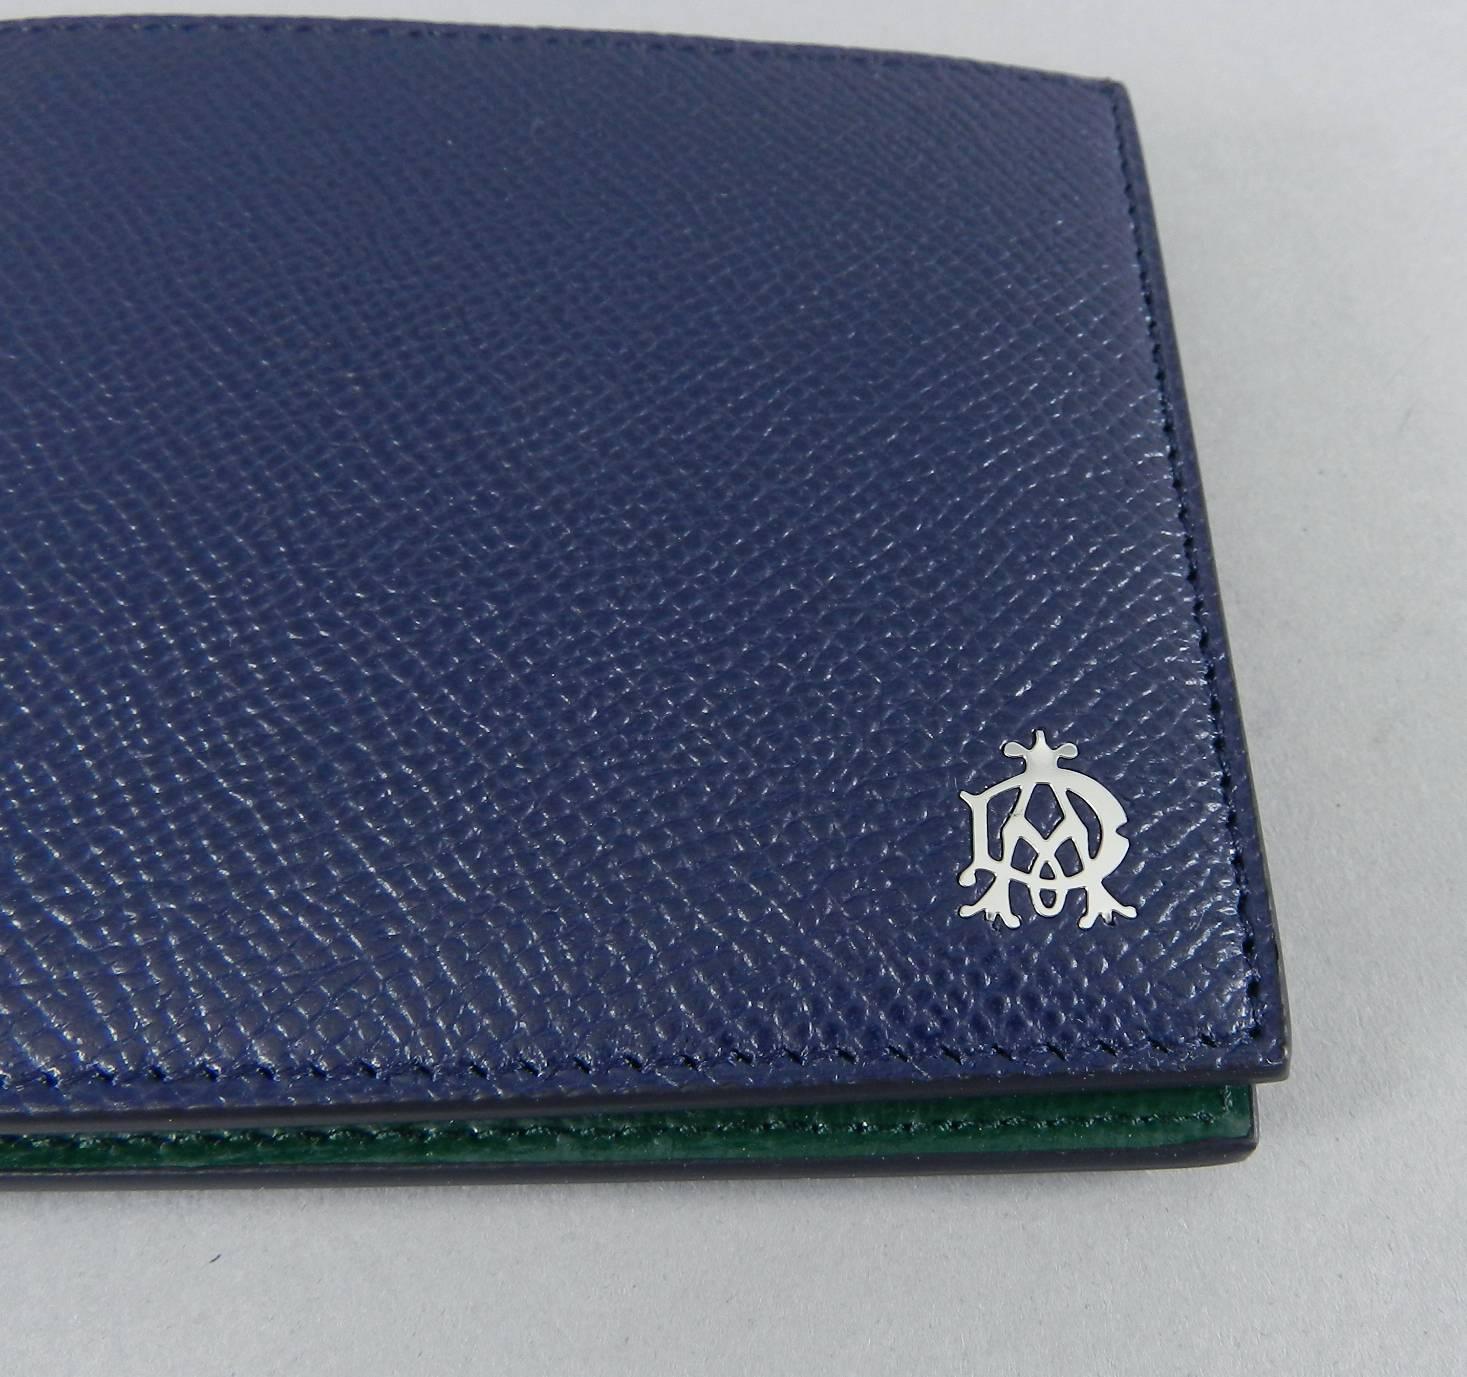 DUNHILL Mens Blue and Green Bifold Leather Wallet.  Signature silver metal logo at bottom right corner.  Original papers still in card slots. Excellent new without tags. Measures 4.25 x 3.75